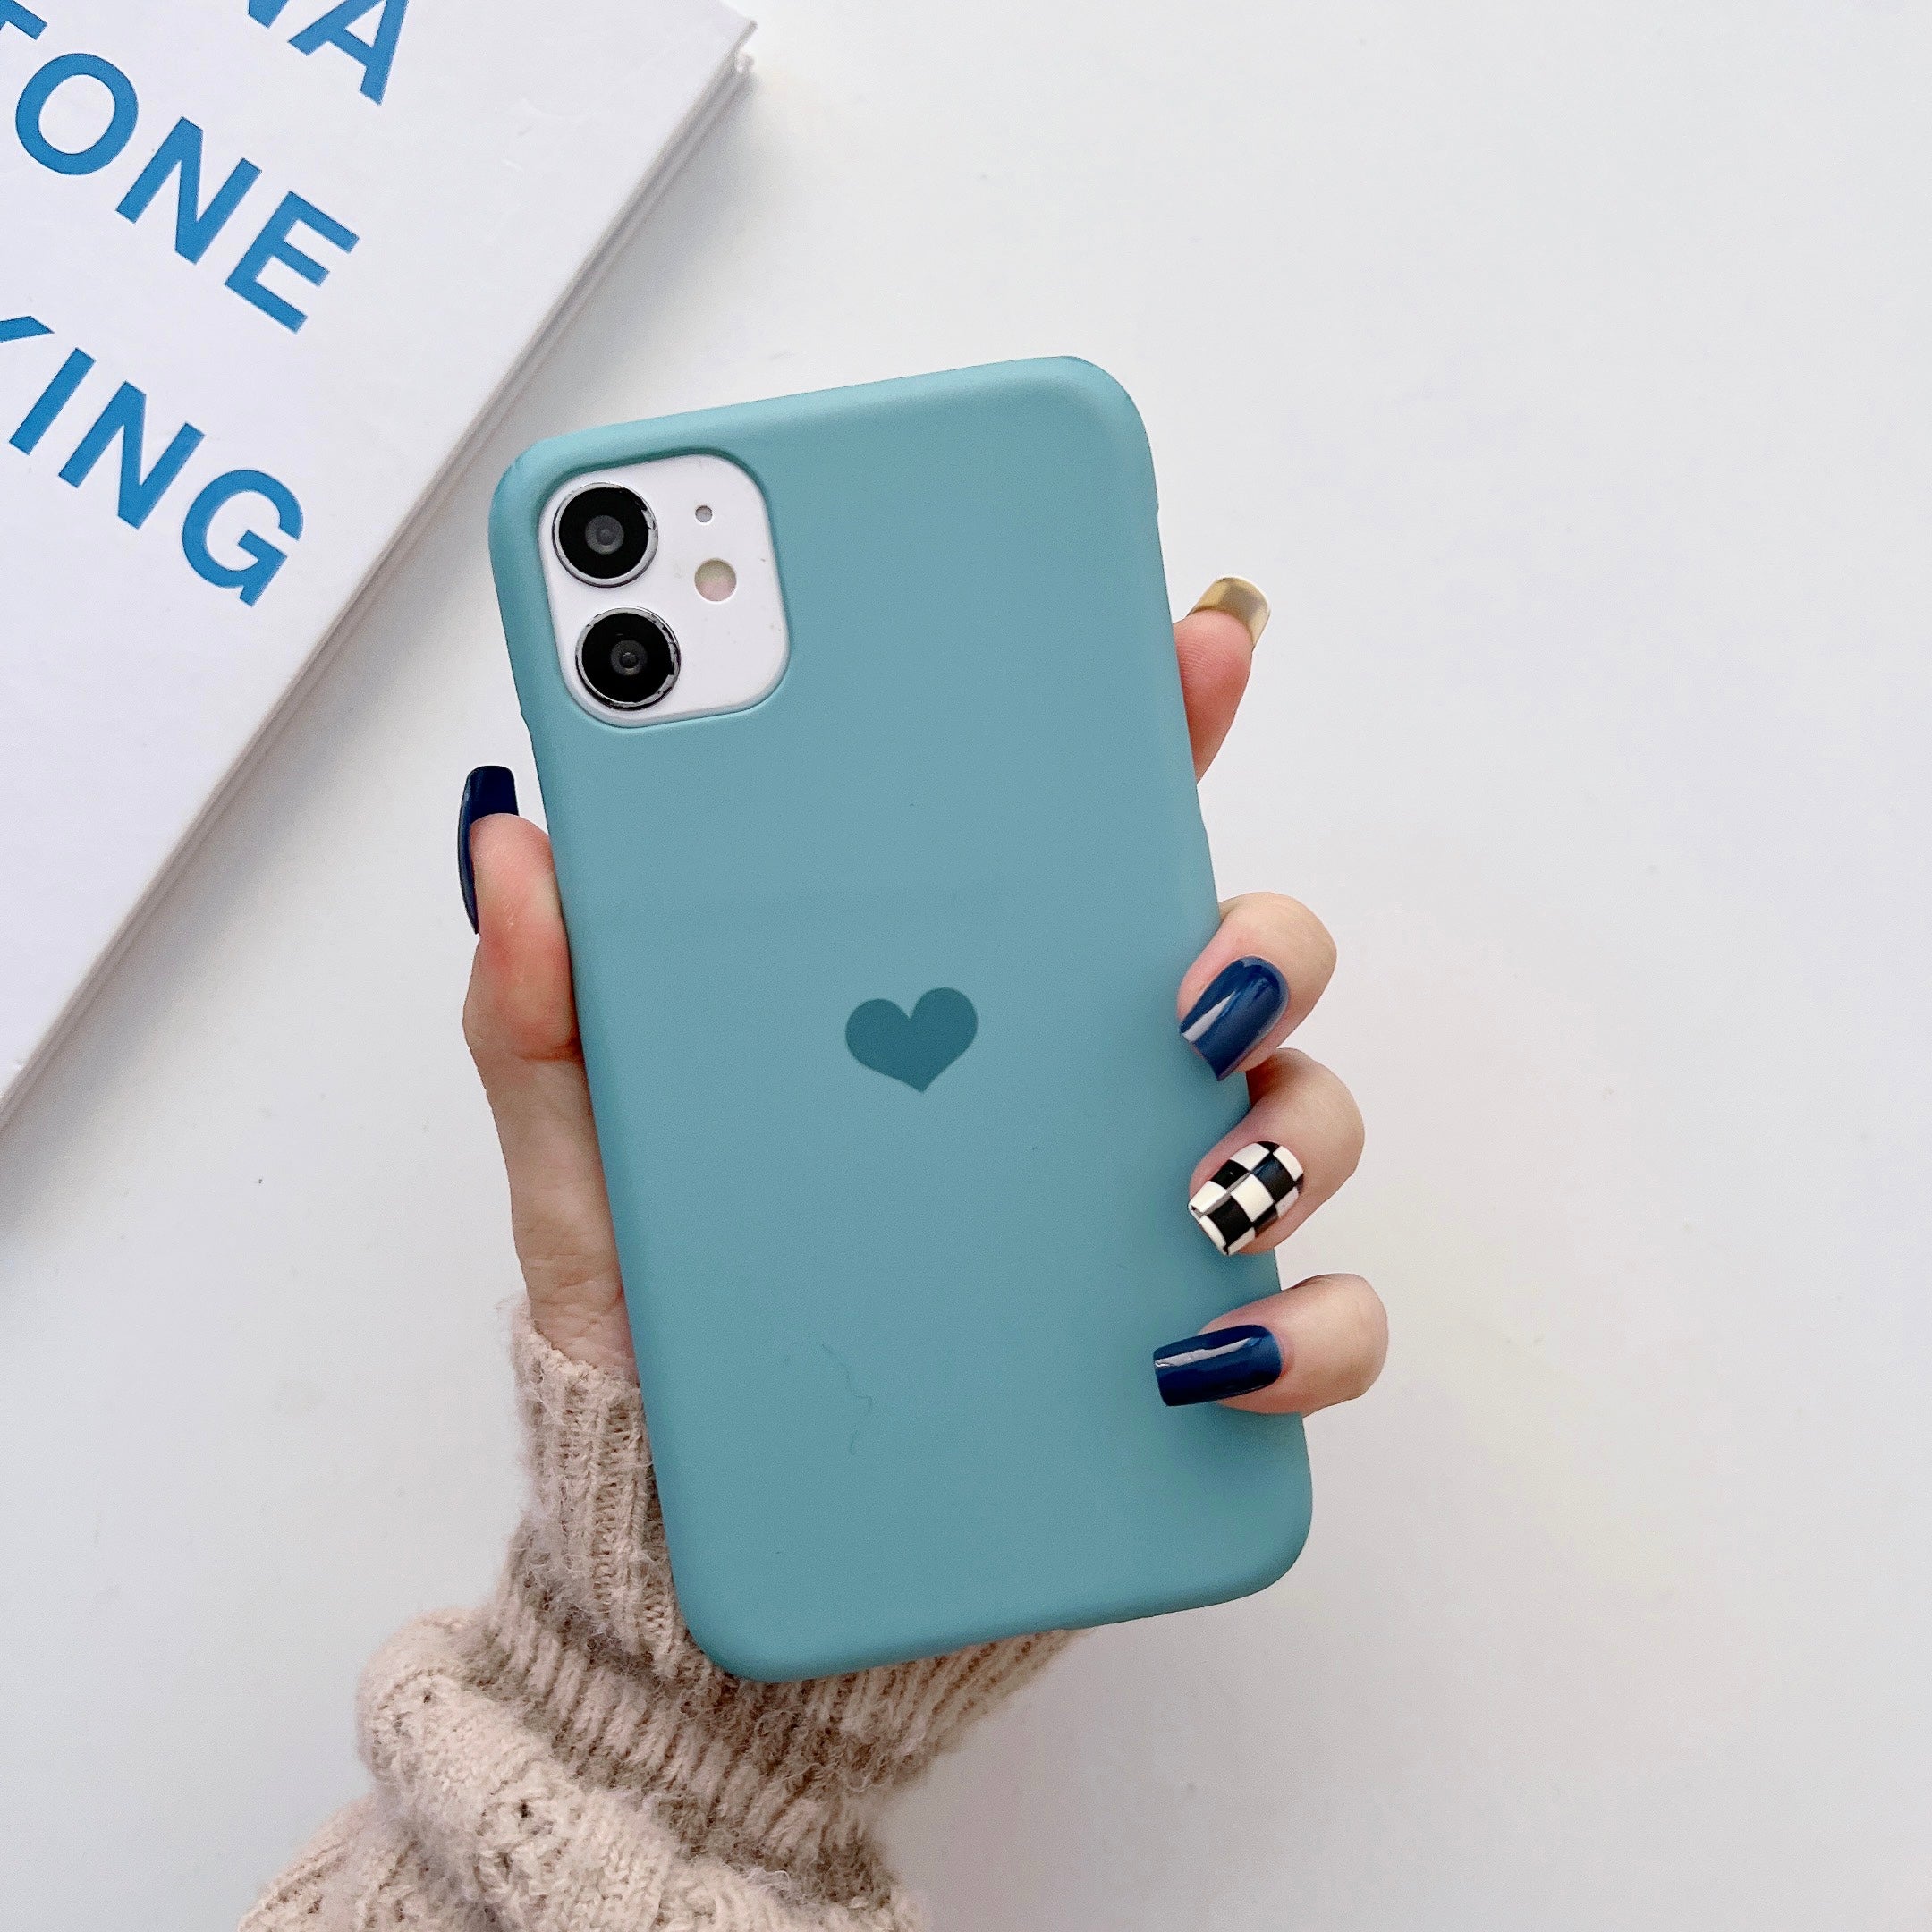 The Pastel Blue Slim Case Cover With Holder - Kalakaar Indiaa